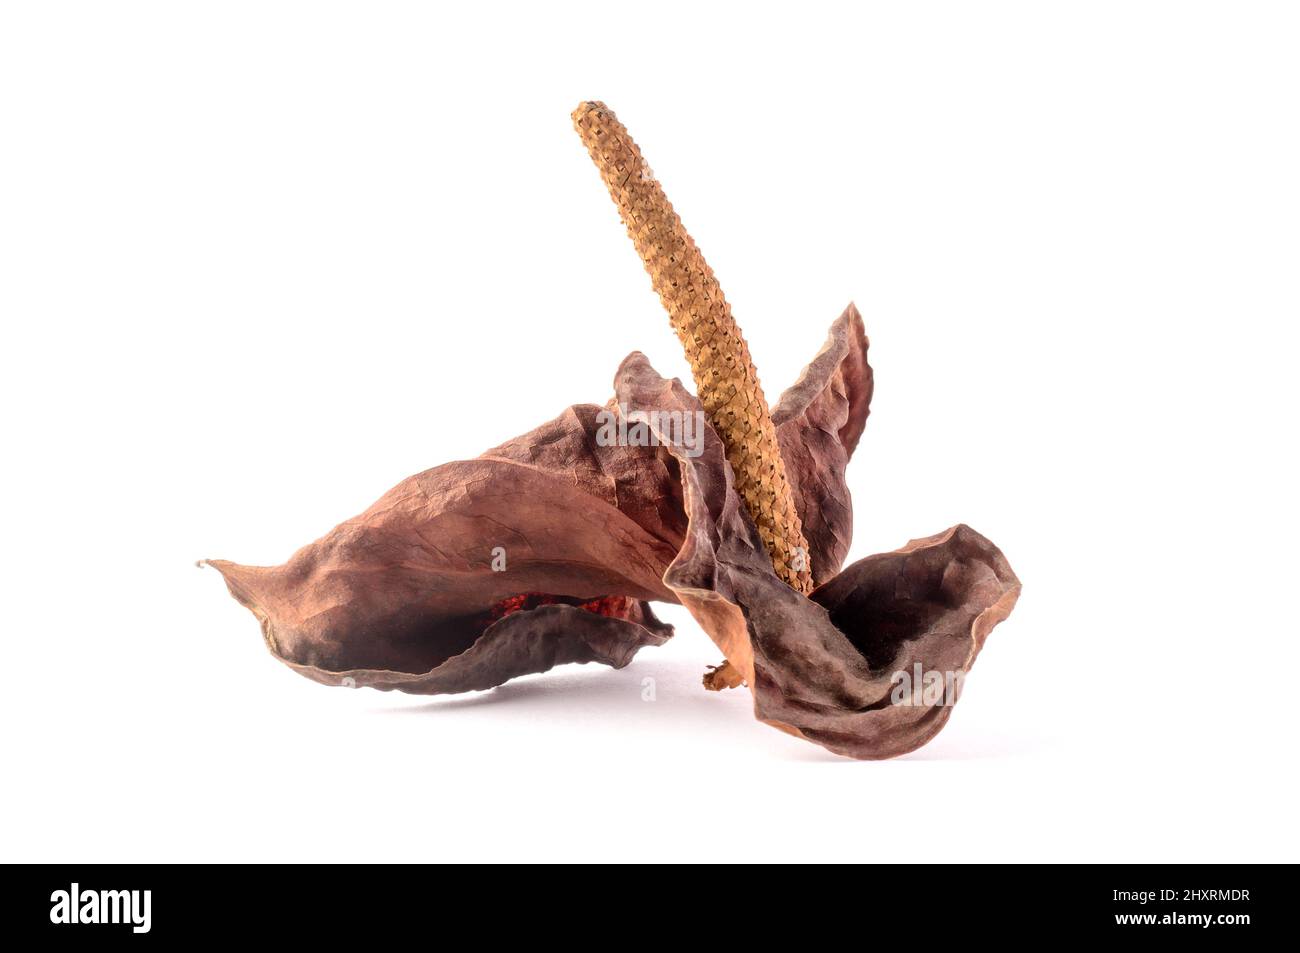 dried anthurium flower, also known as tailflower, flamingo flower and laceleaf, closeup view isolated on white background Stock Photo